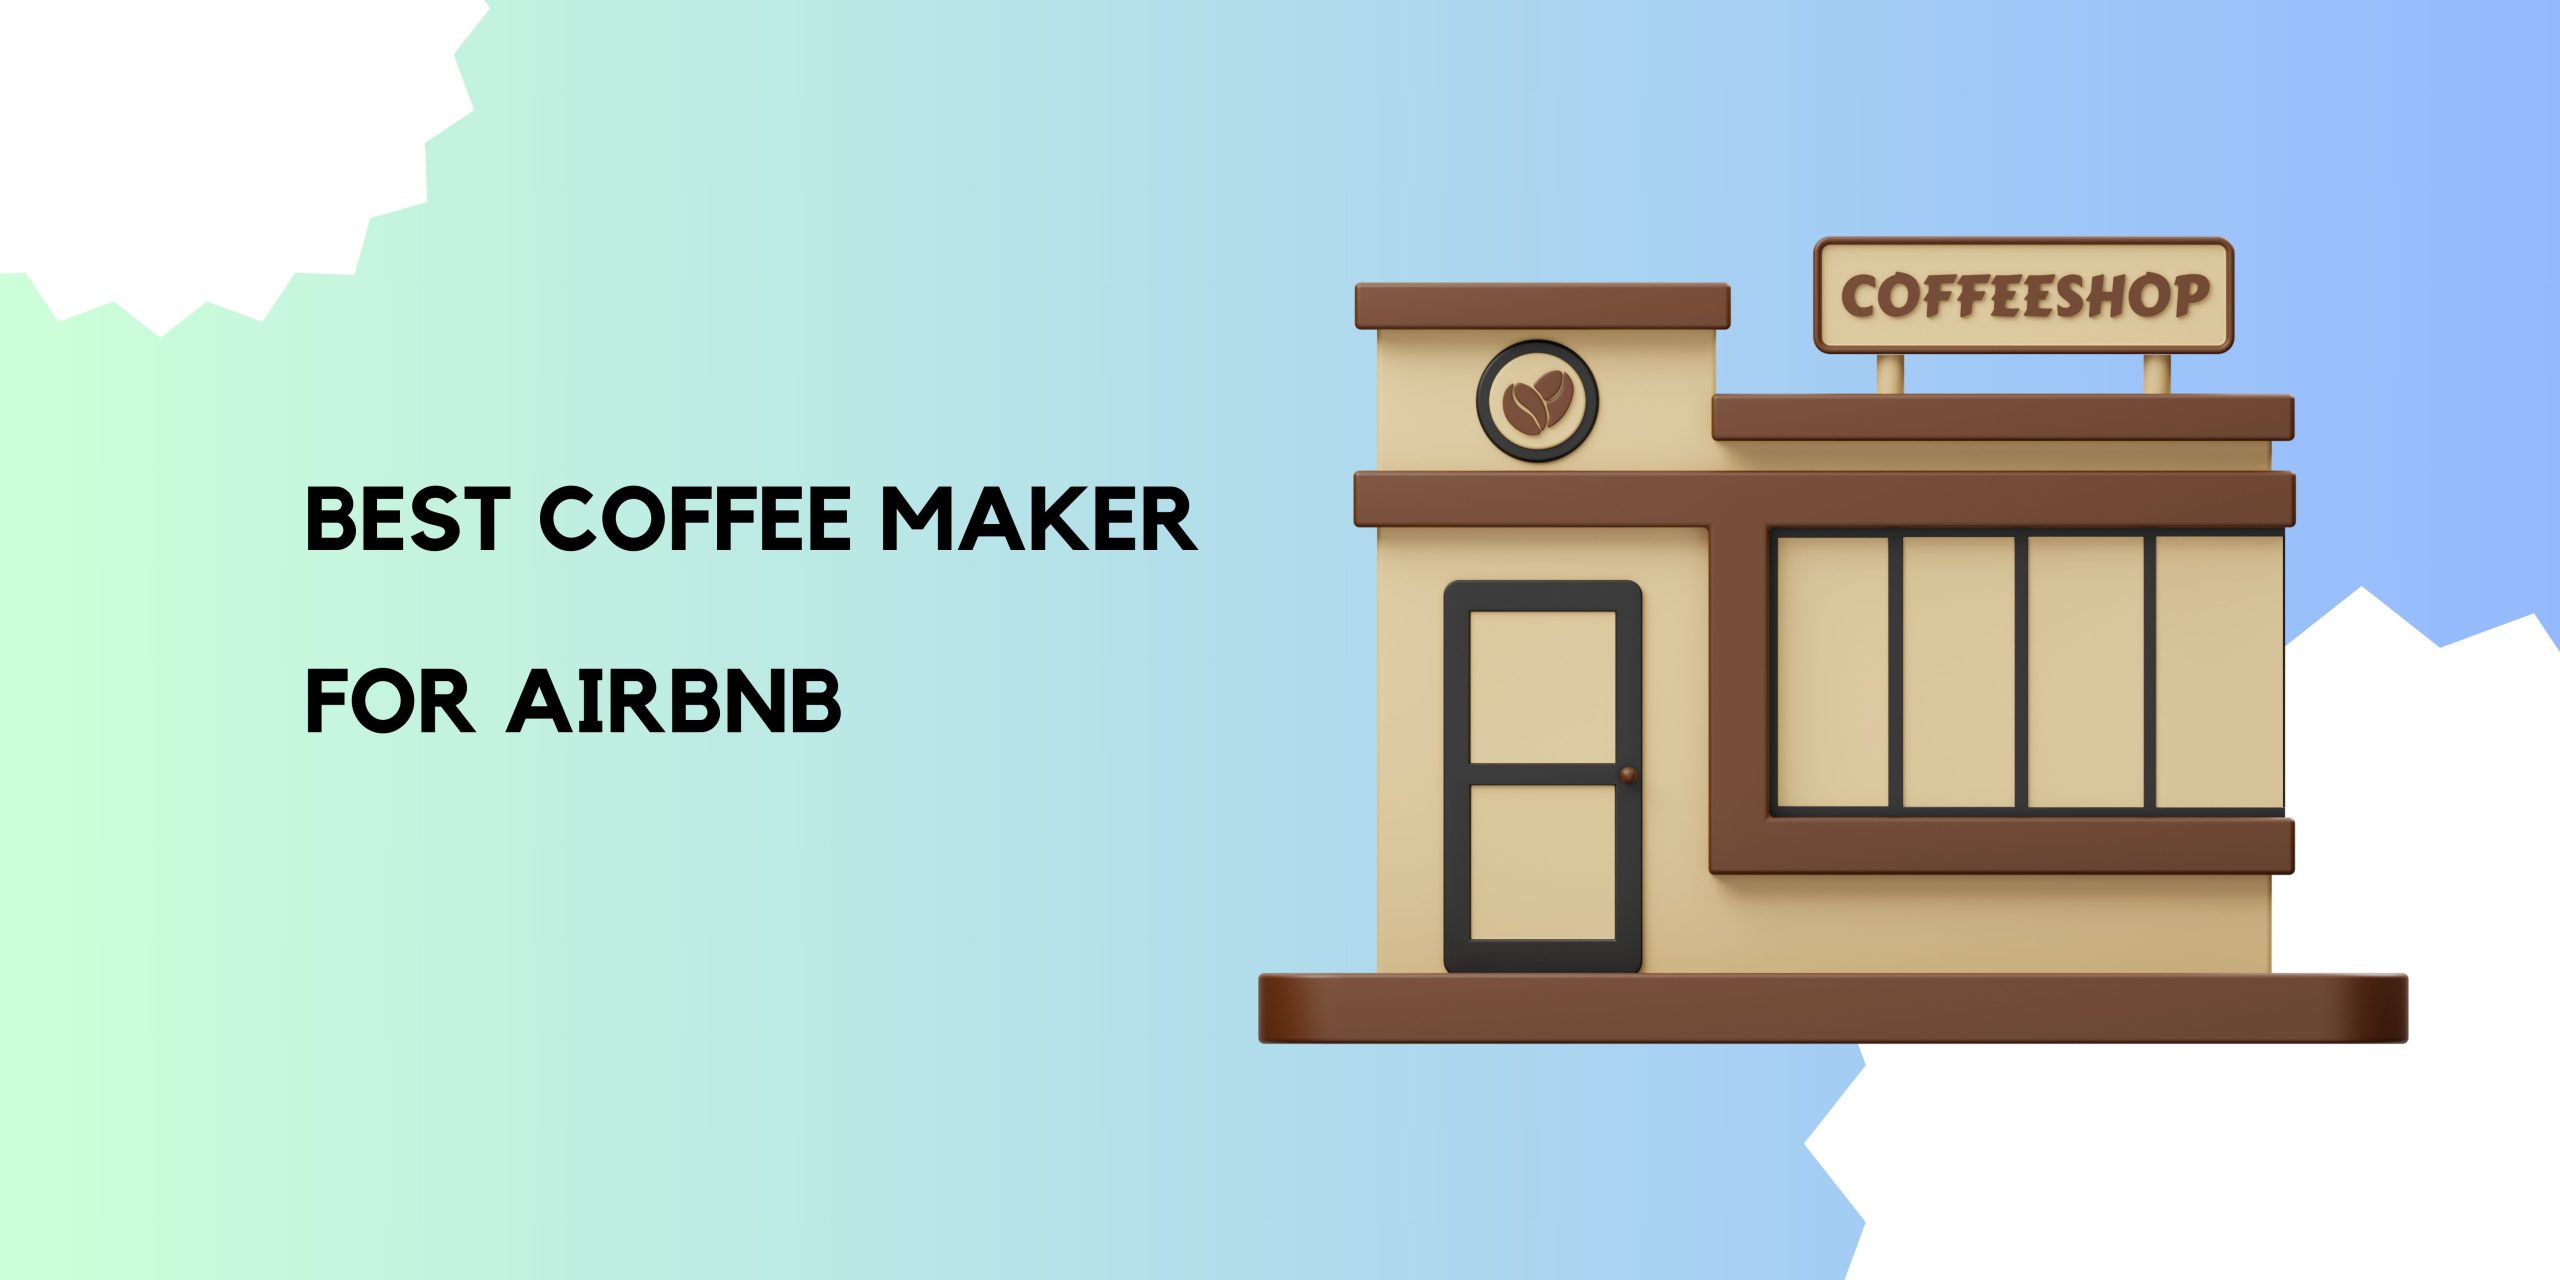 Best coffee maker for airbnb